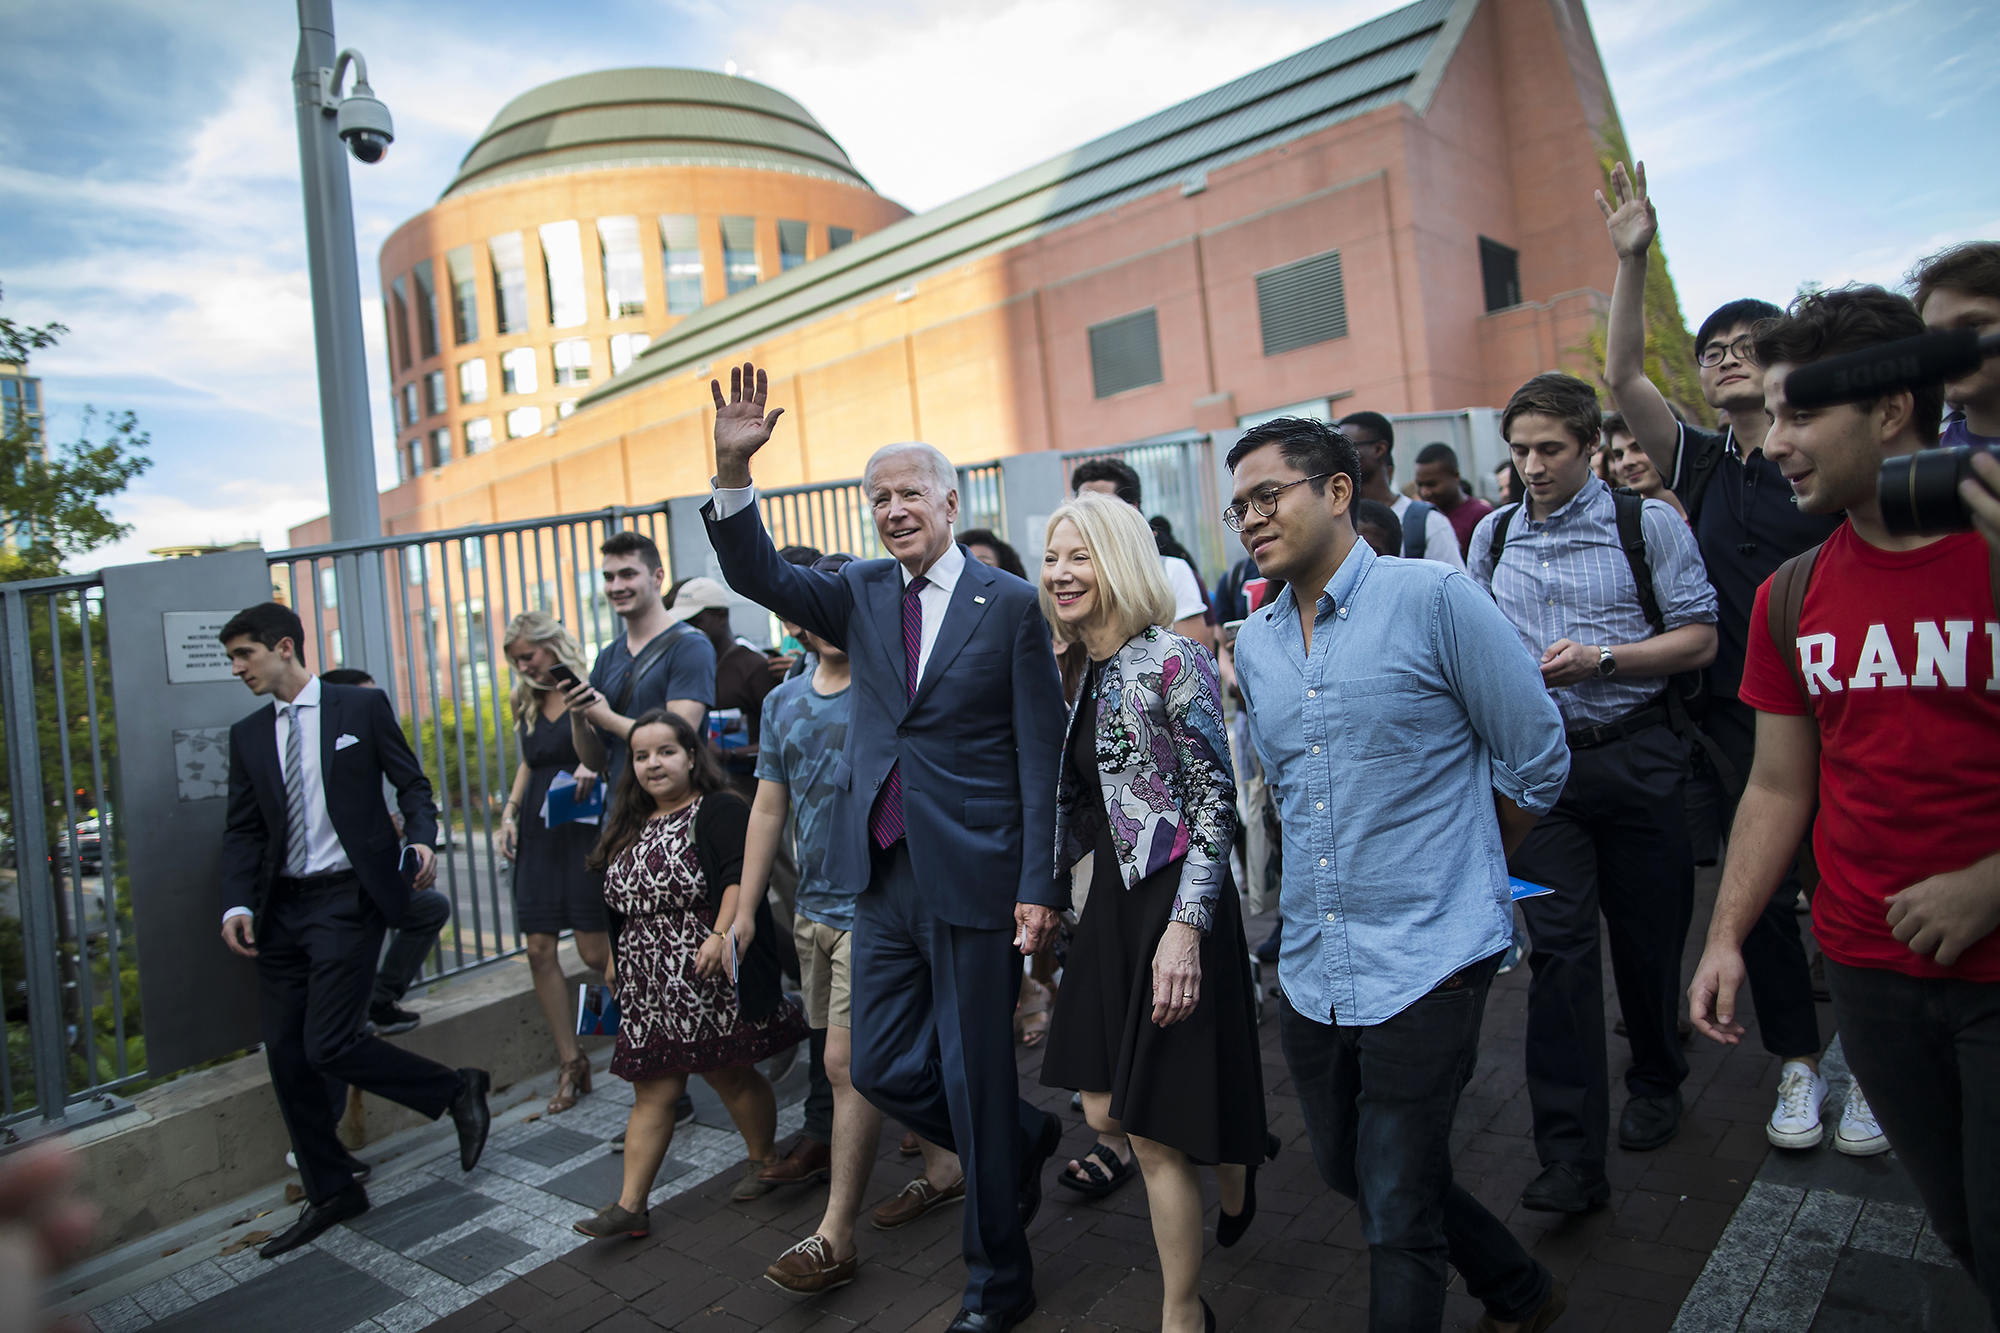 Biden waves on Locust Walk with students following close behind